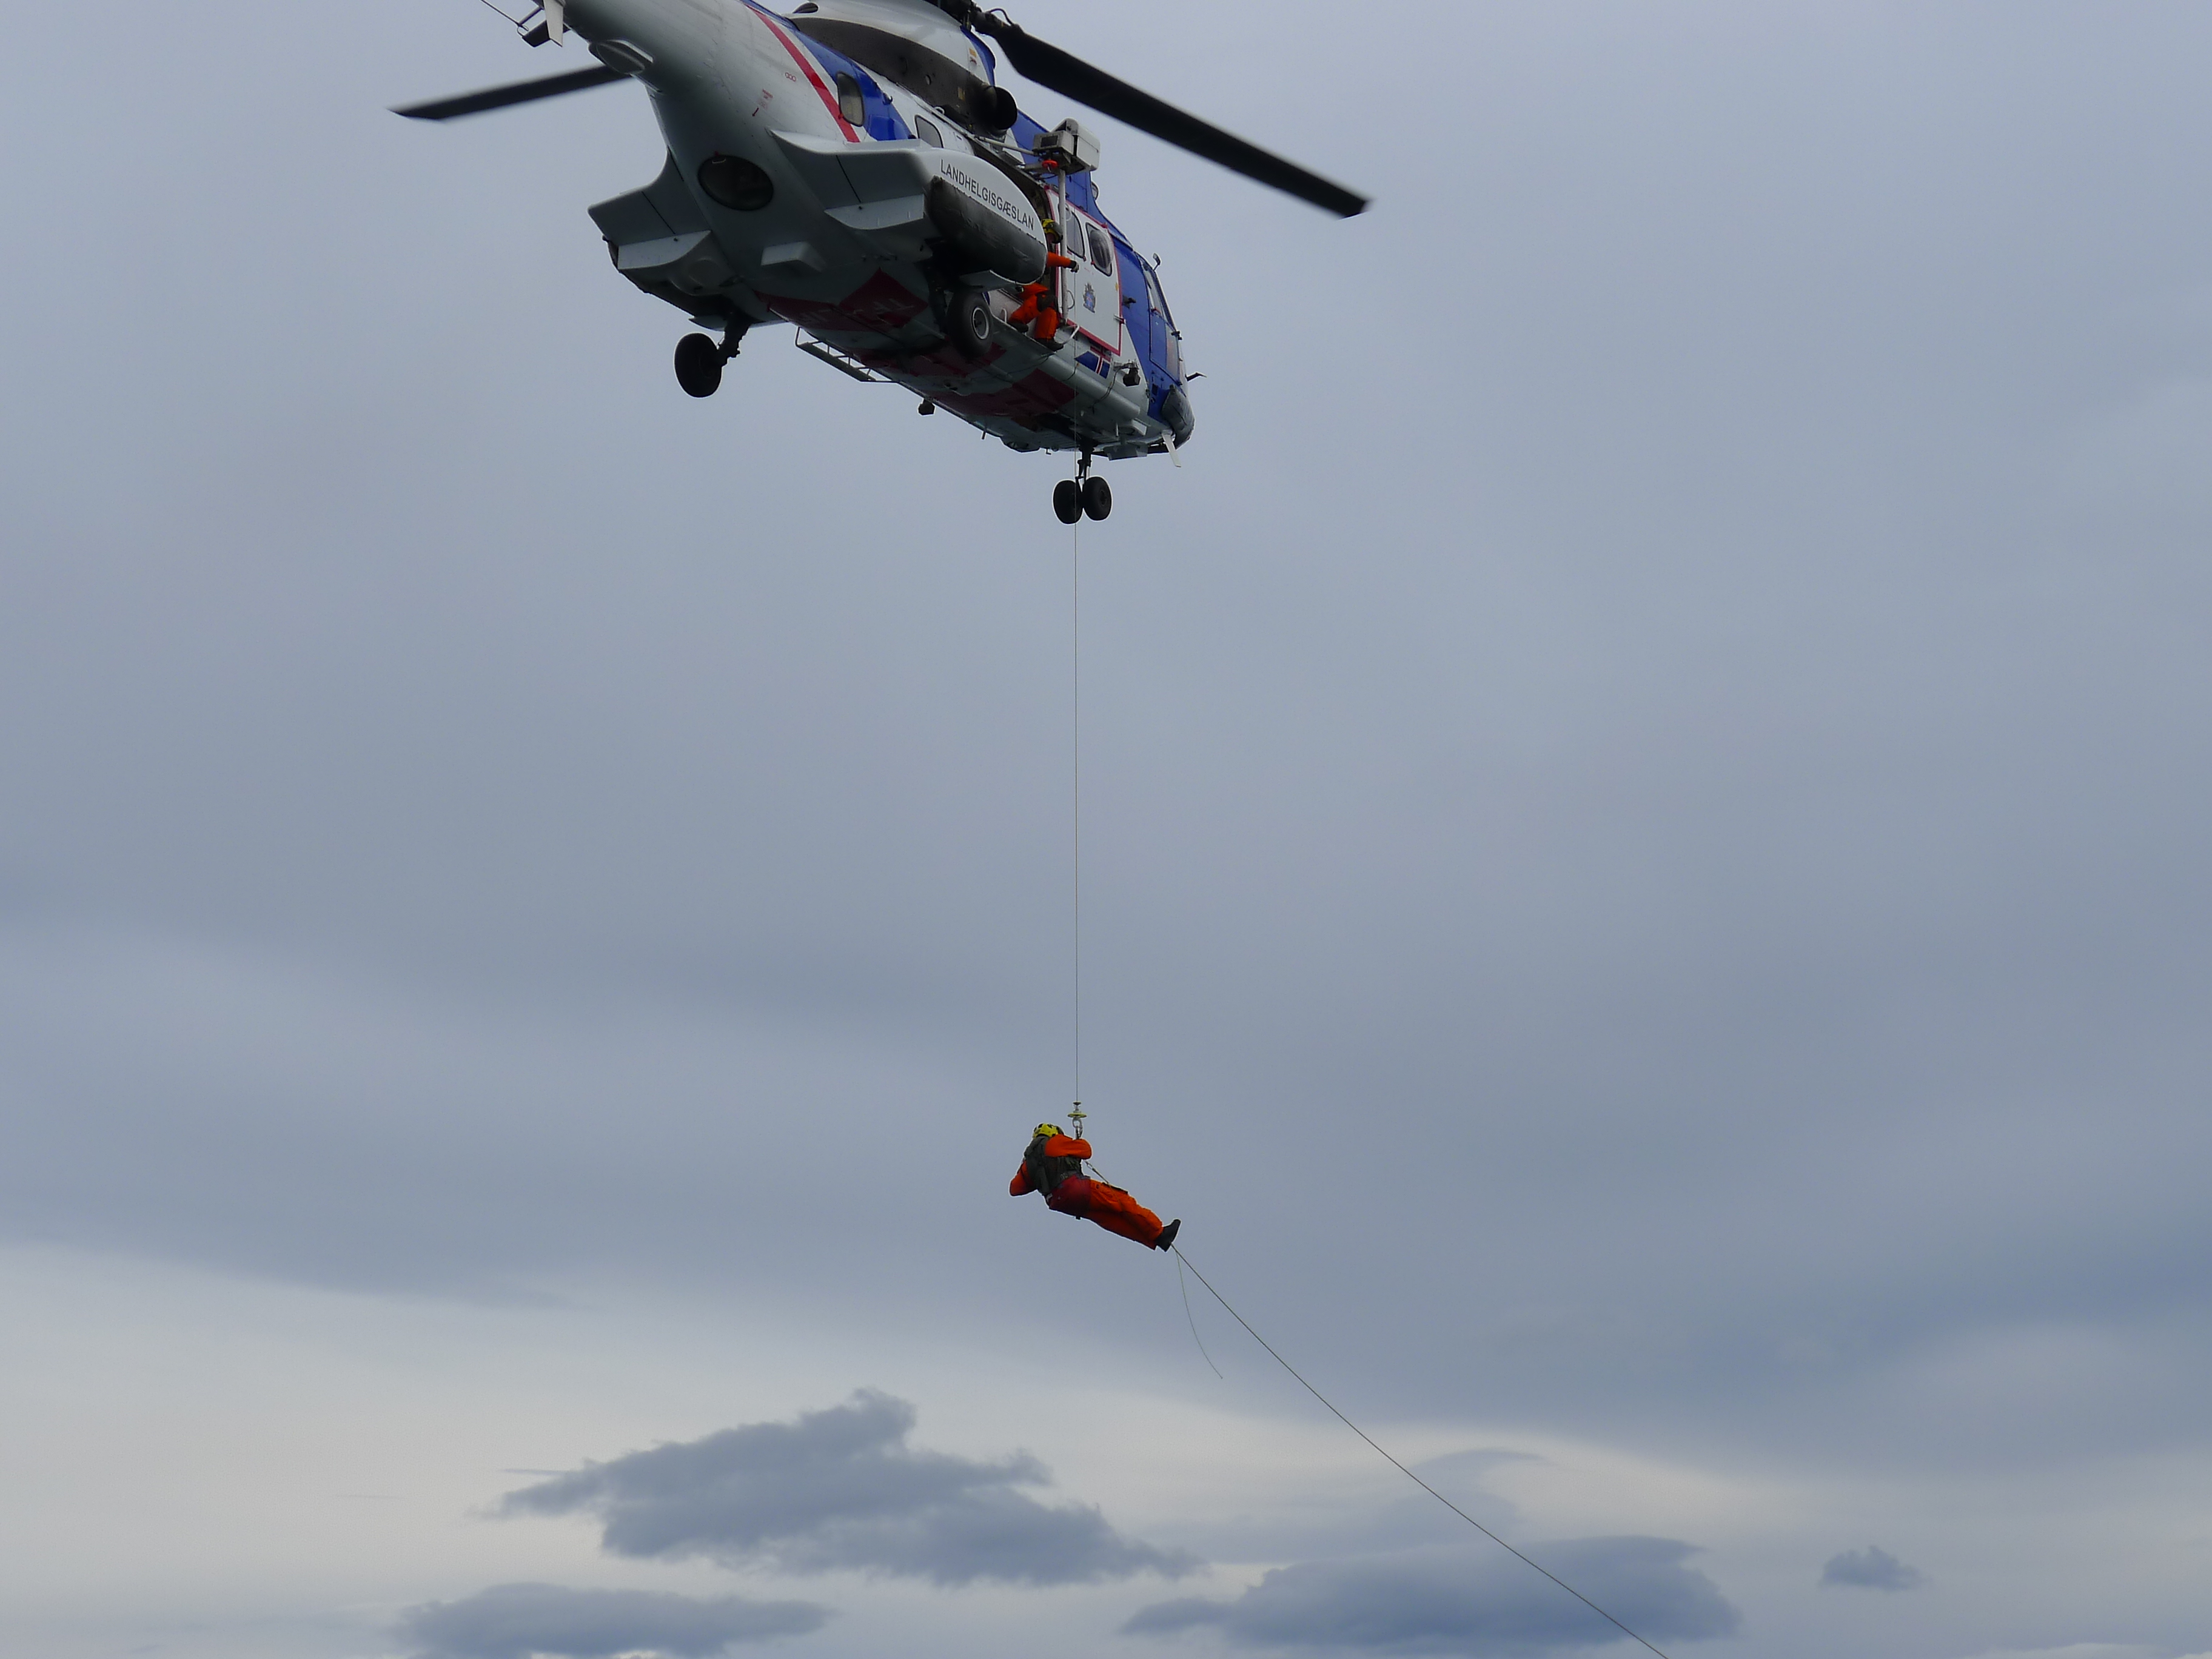 icelandic coast guard doing drills over our ship